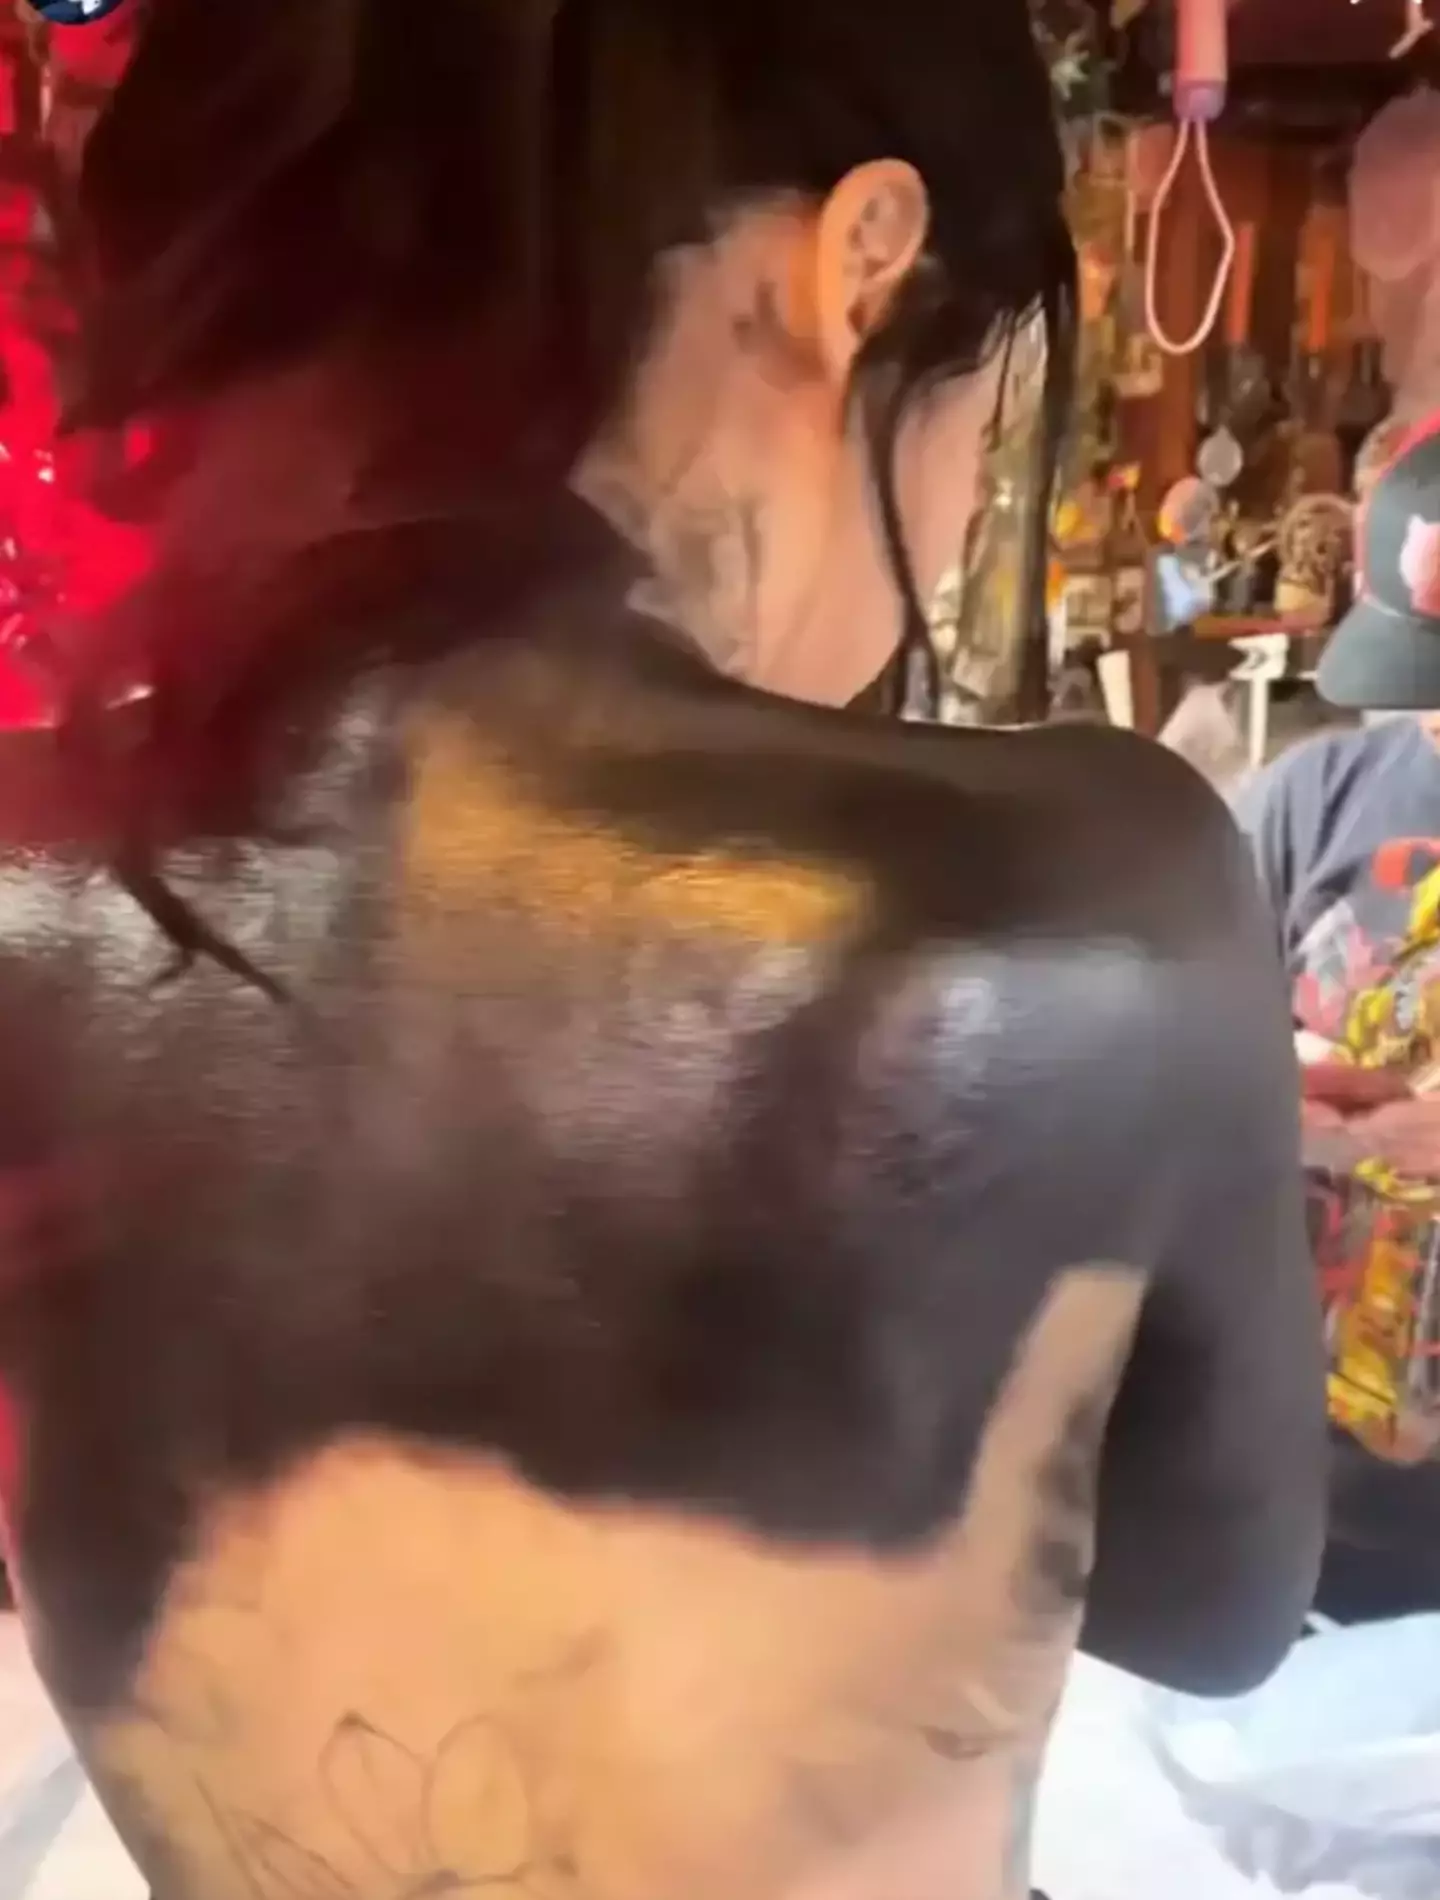 Kat Von D said getting her tattoos covered with blackout ink was 'extremely refreshing'.